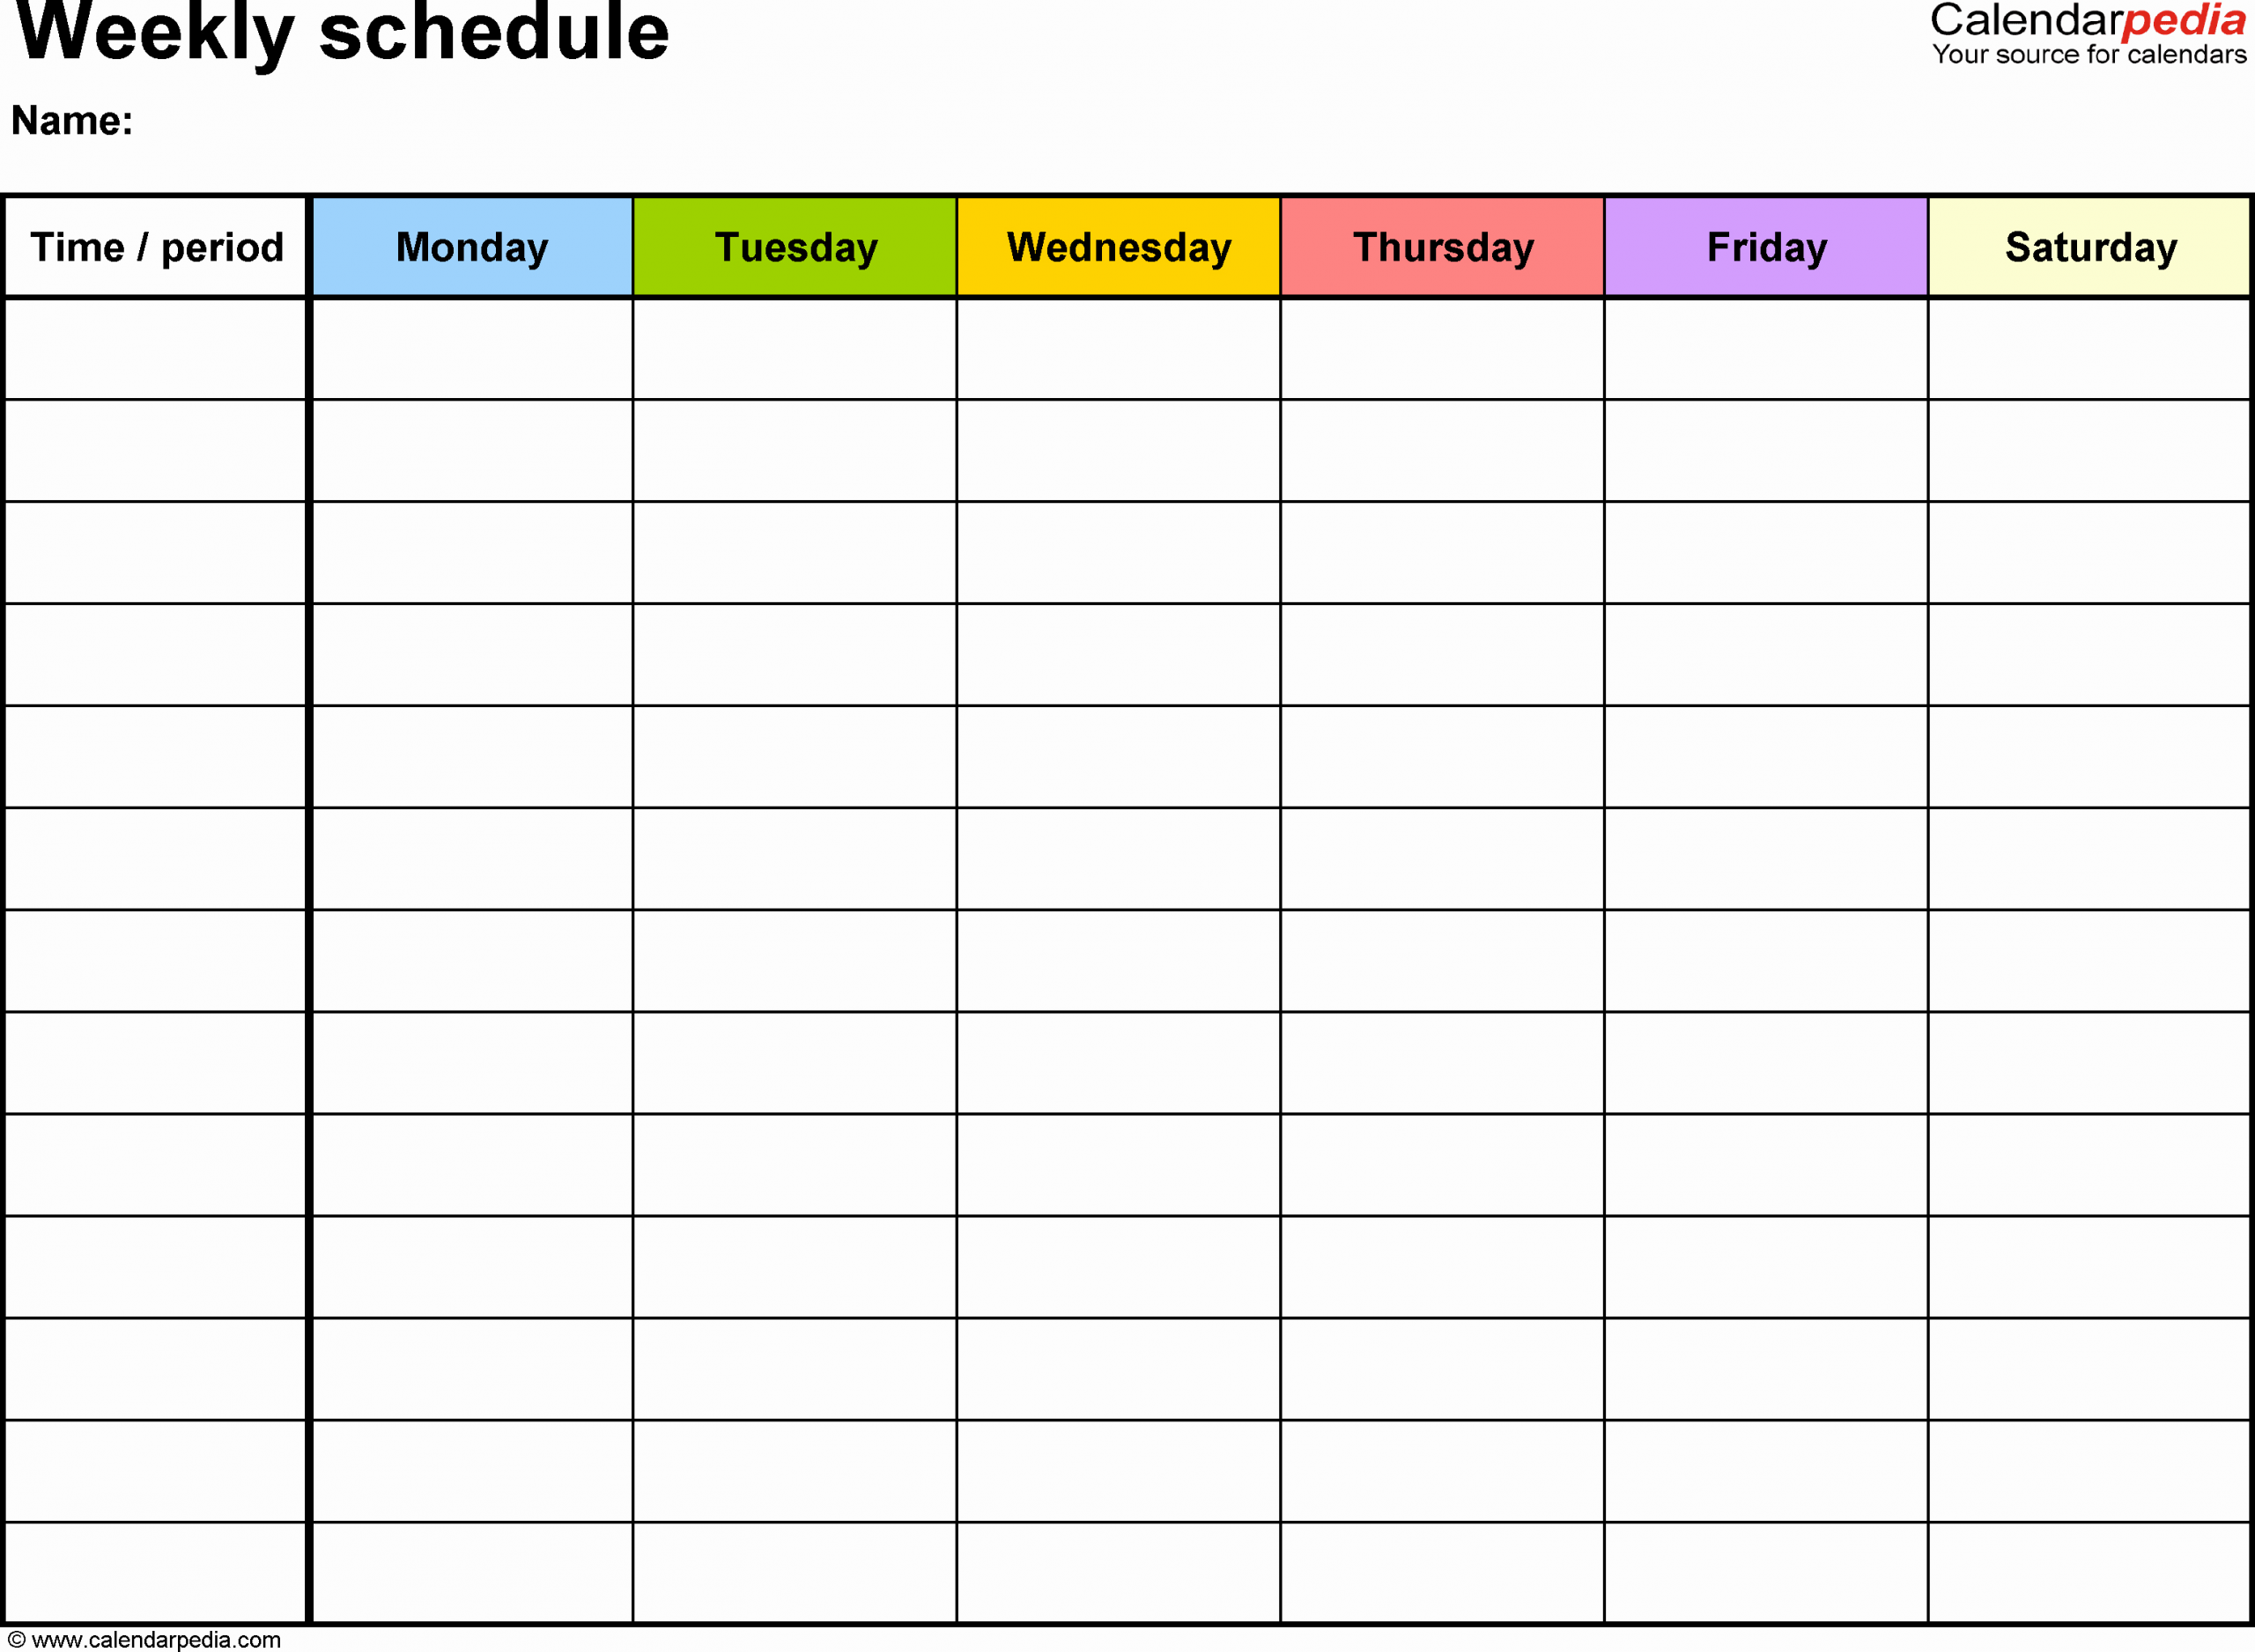 Microsoft Word Schedule Template Best Of Free Weekly Schedule Templates for Word 18 Templates